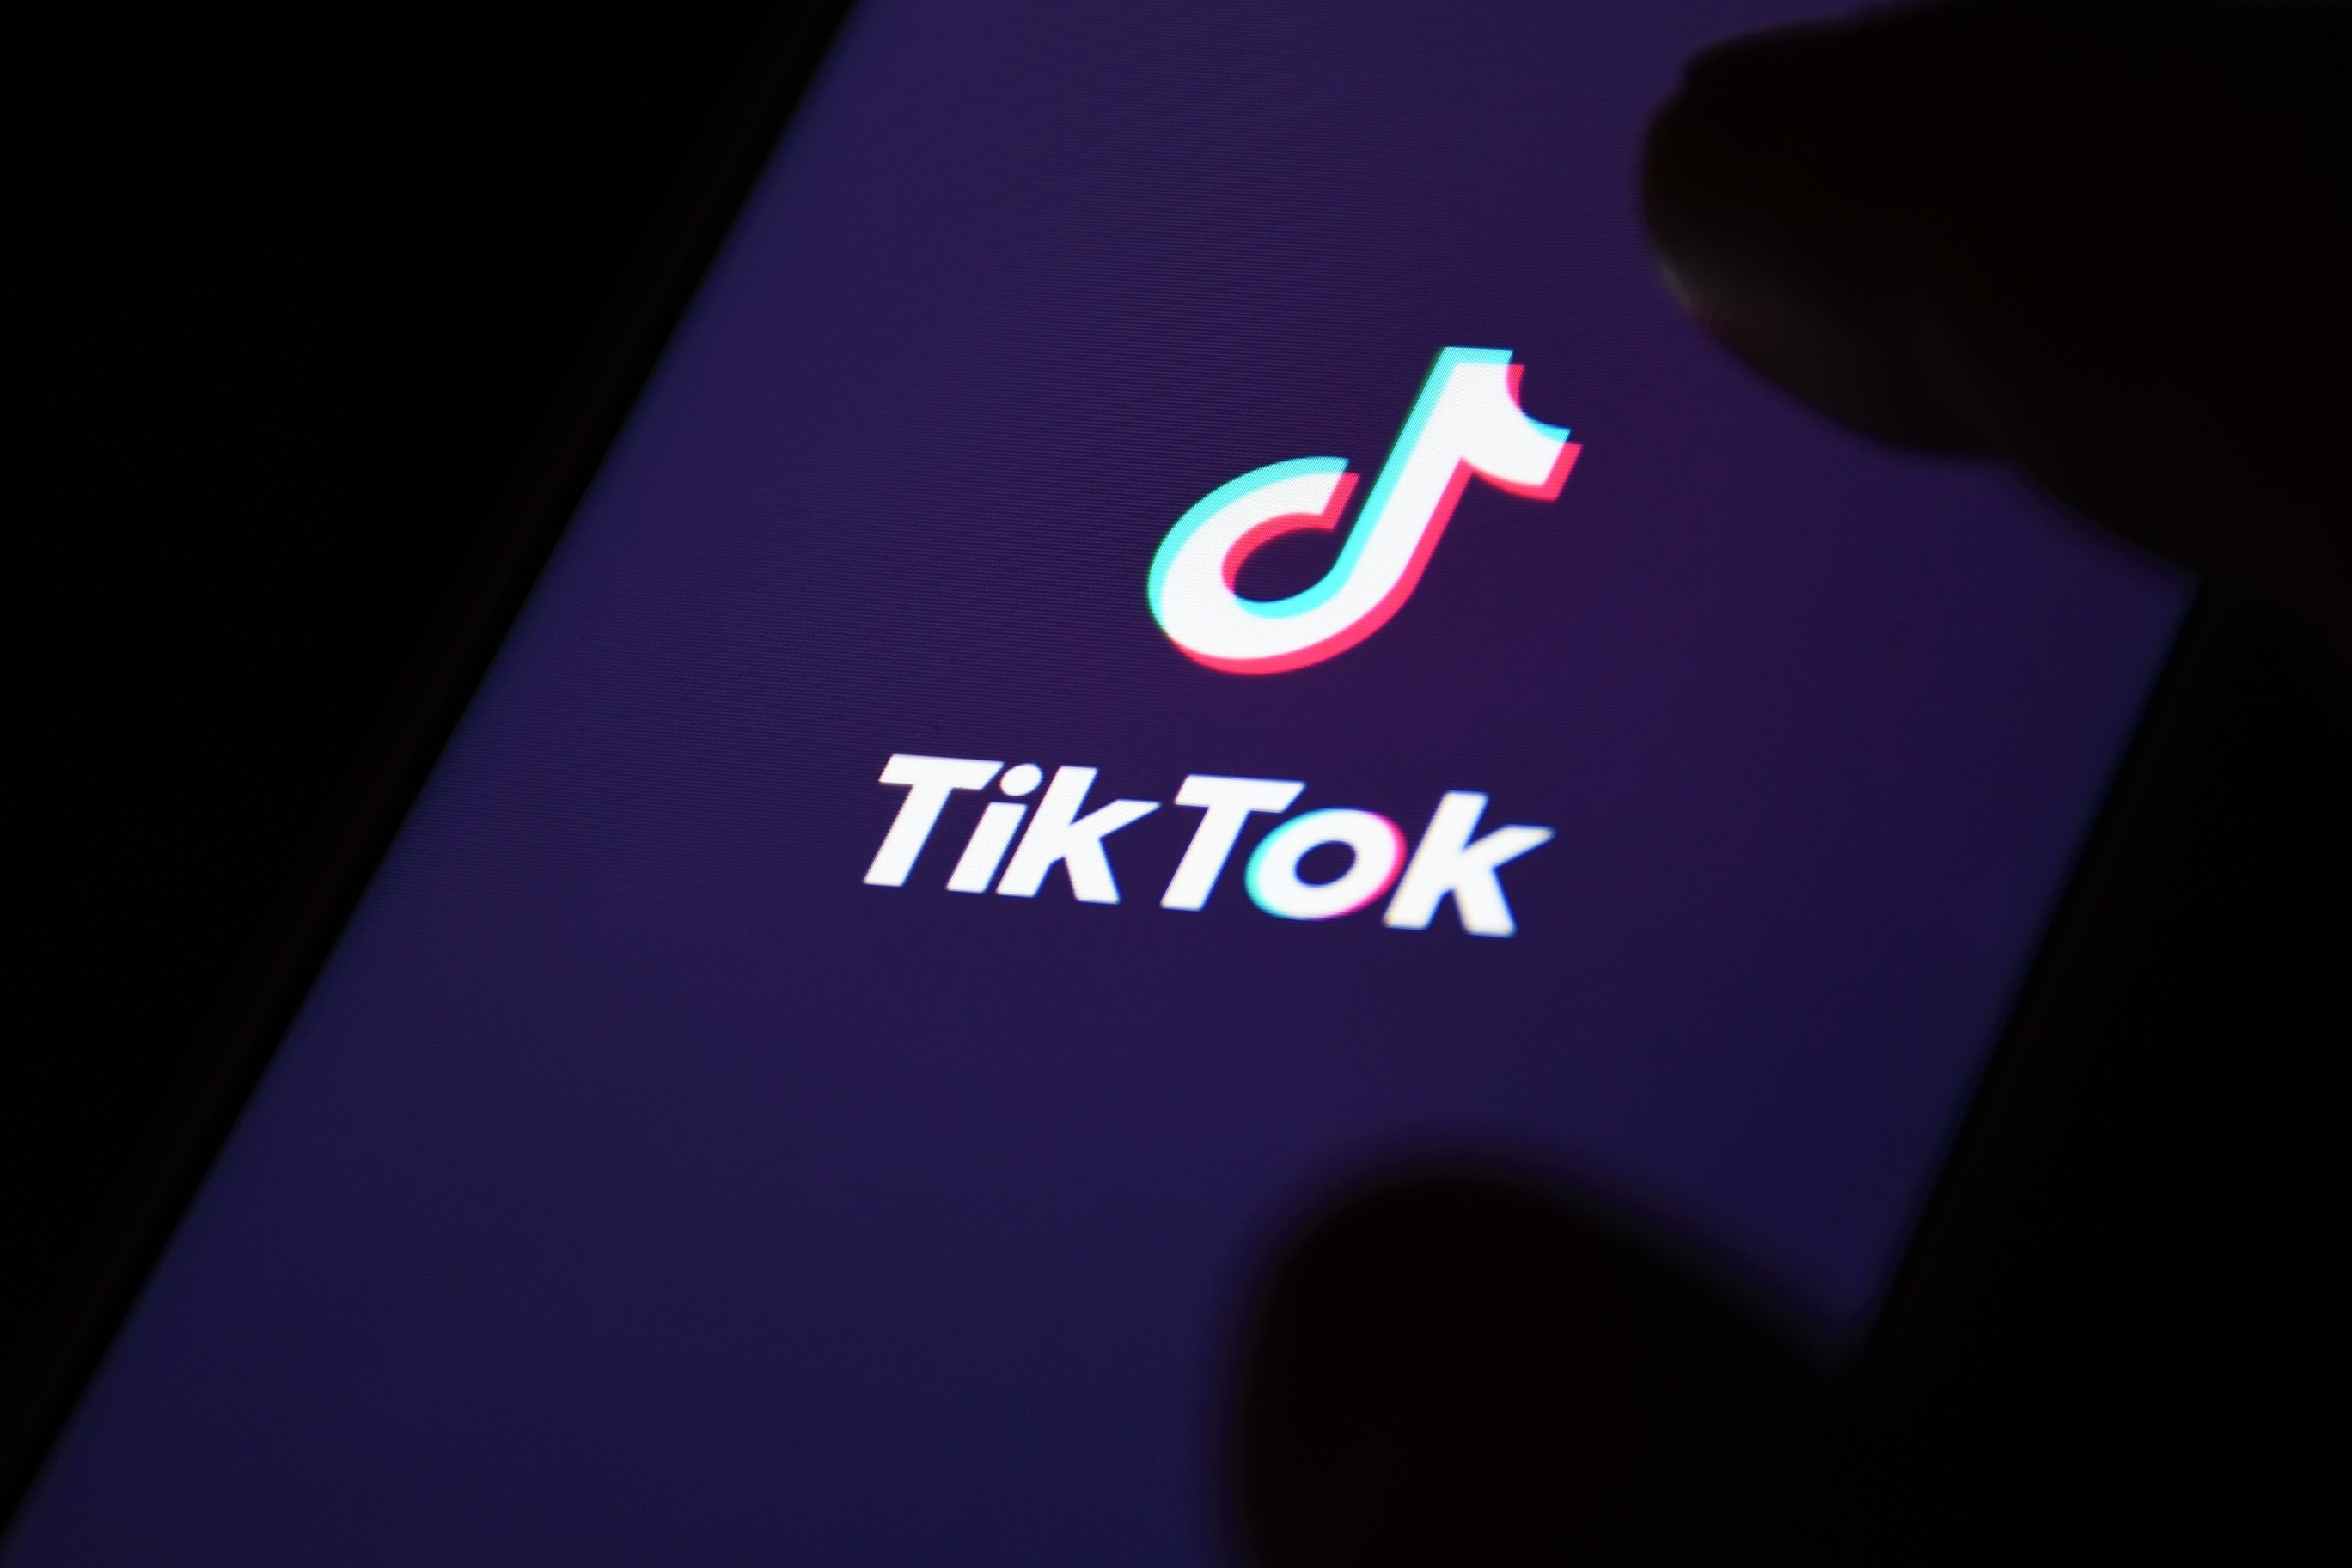 Here’s all you need to know about the potential TikTok ban in the US. Photo: TNS